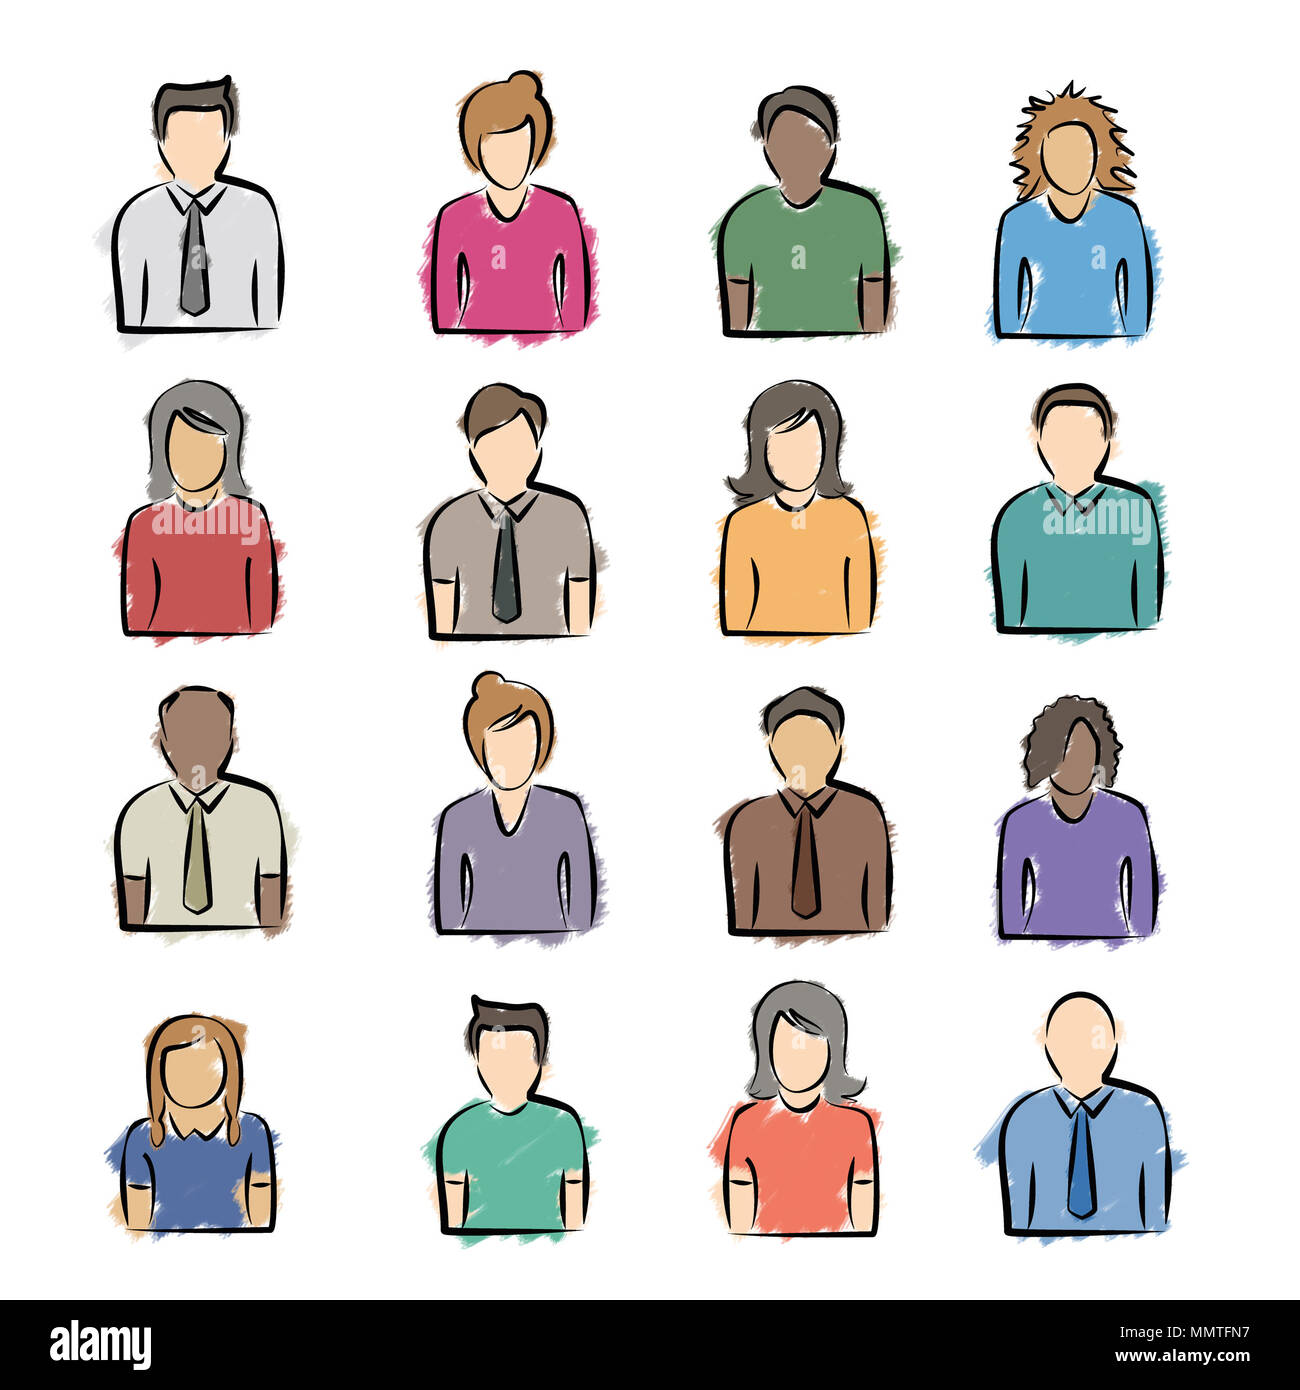 A diversity of colorful sketched people icons Stock Photo